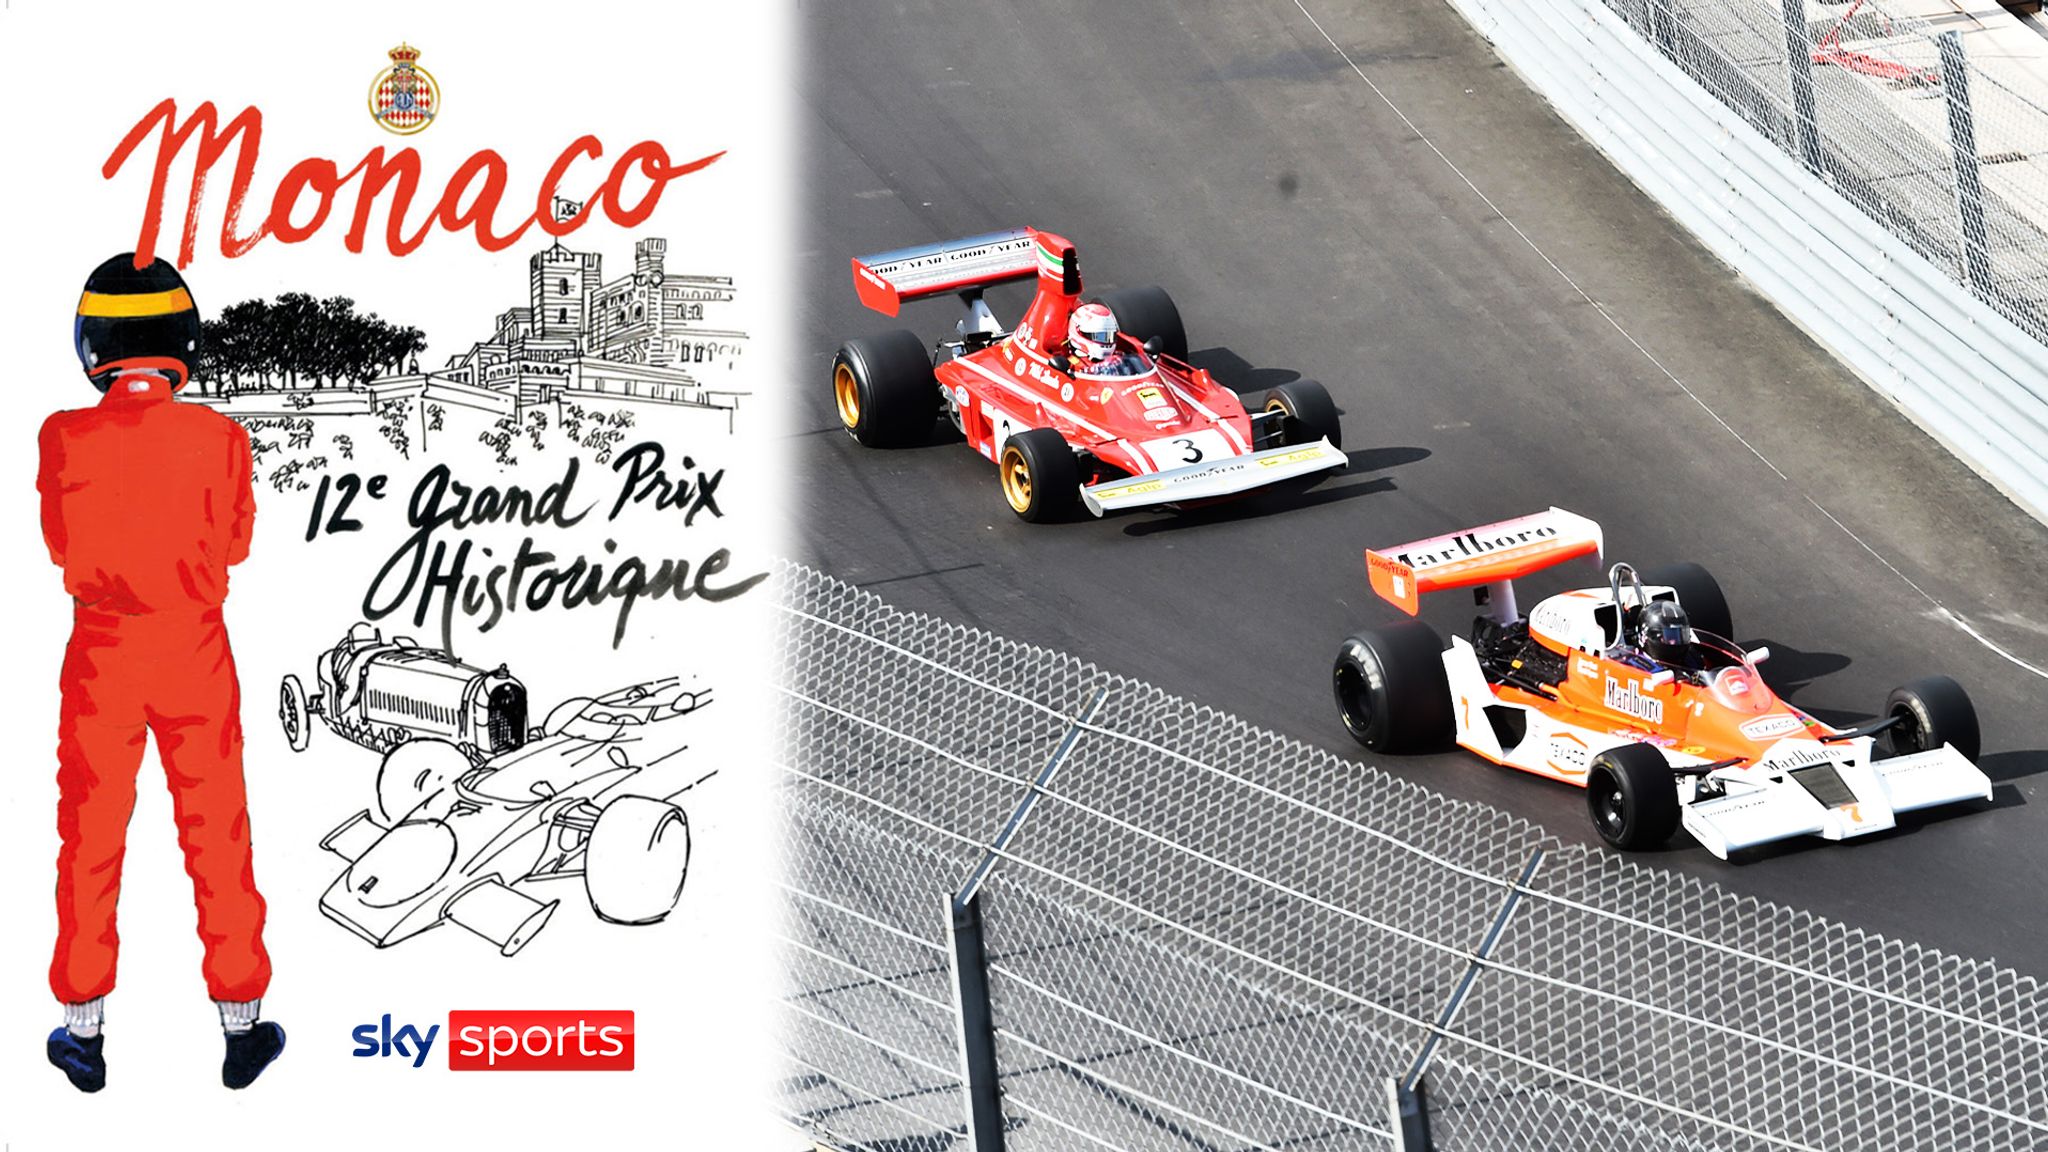 Monaco Historique Watch classic Formula 1 cars race again on Sky Sports F1 YouTube this weekend F1 News